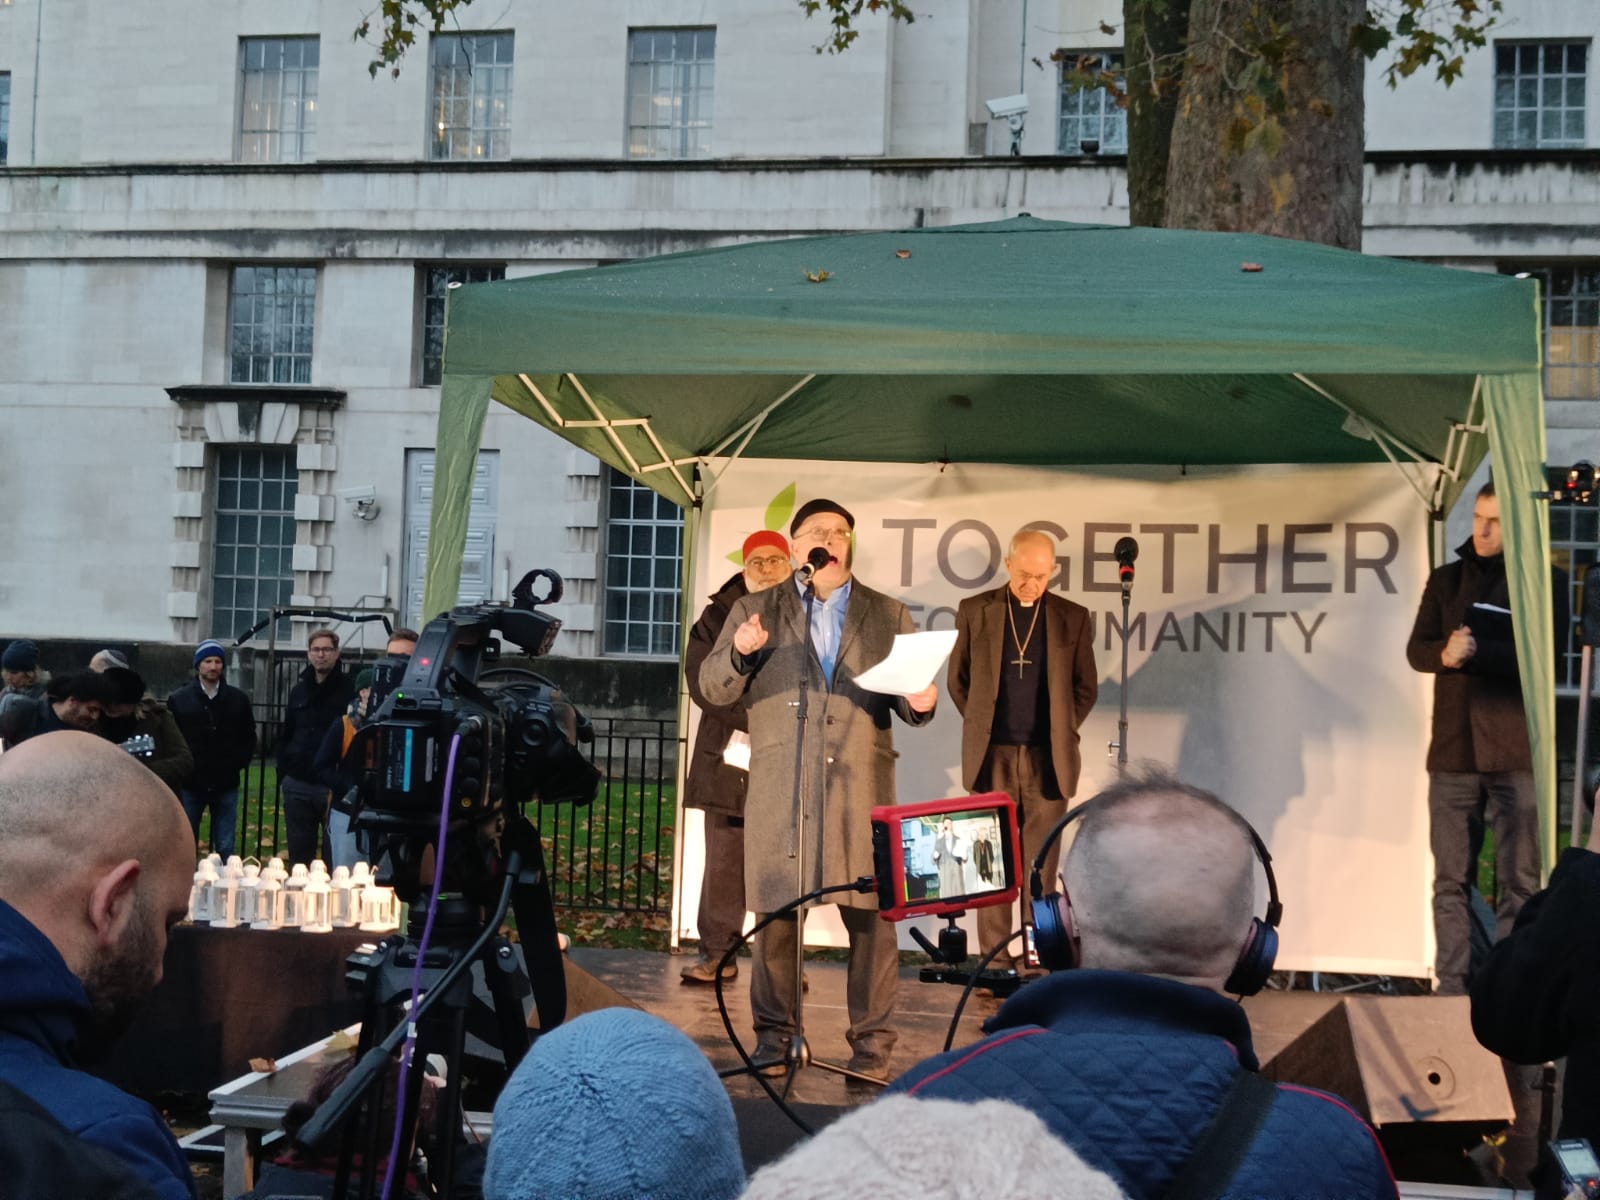 HIAS+JCORE's Executive Director David Mason stands on a stage at the Together4Humanity vigil. Behind him are stood the Archbishop of Canterbury and Imam Monawar Hussain